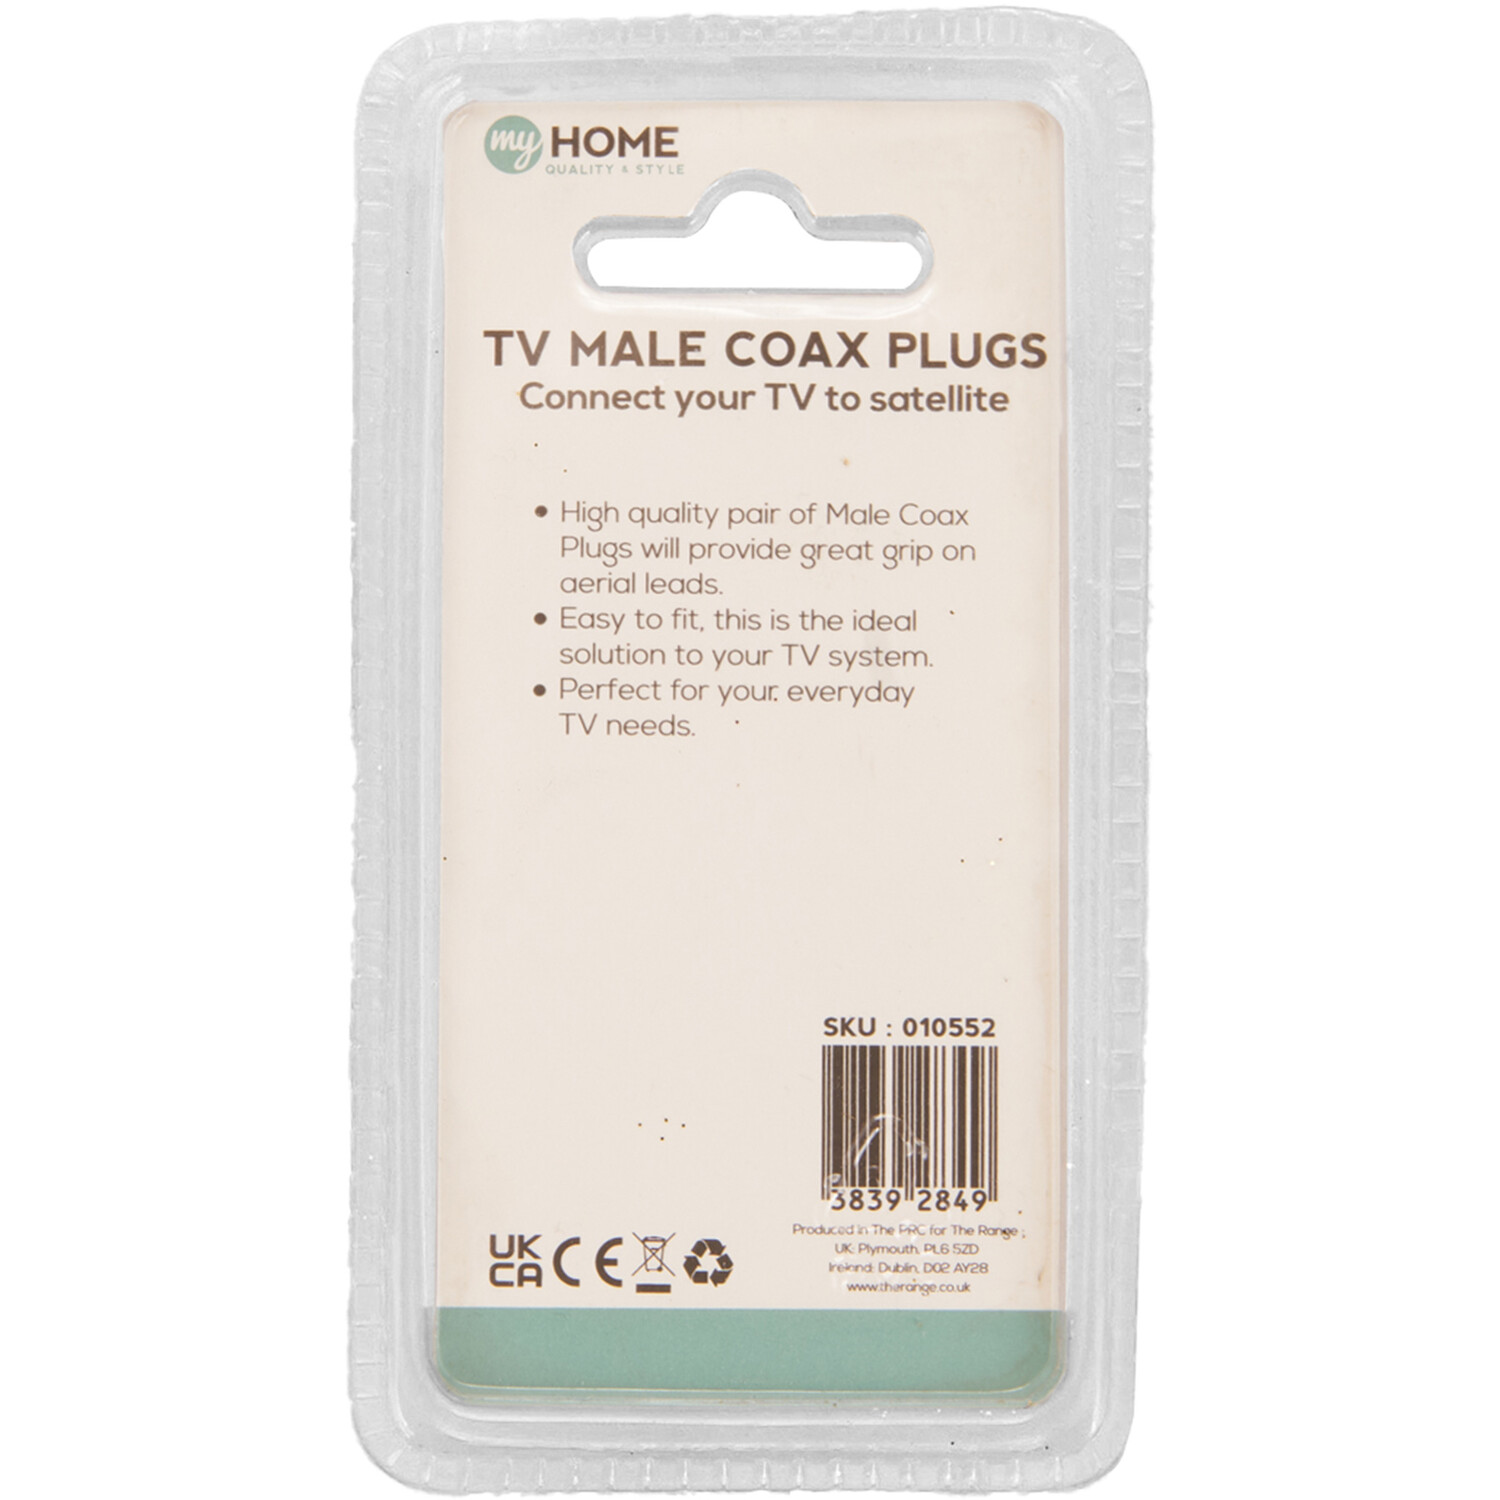 My Home TV Male Coax Plugs 2 Pack Image 2